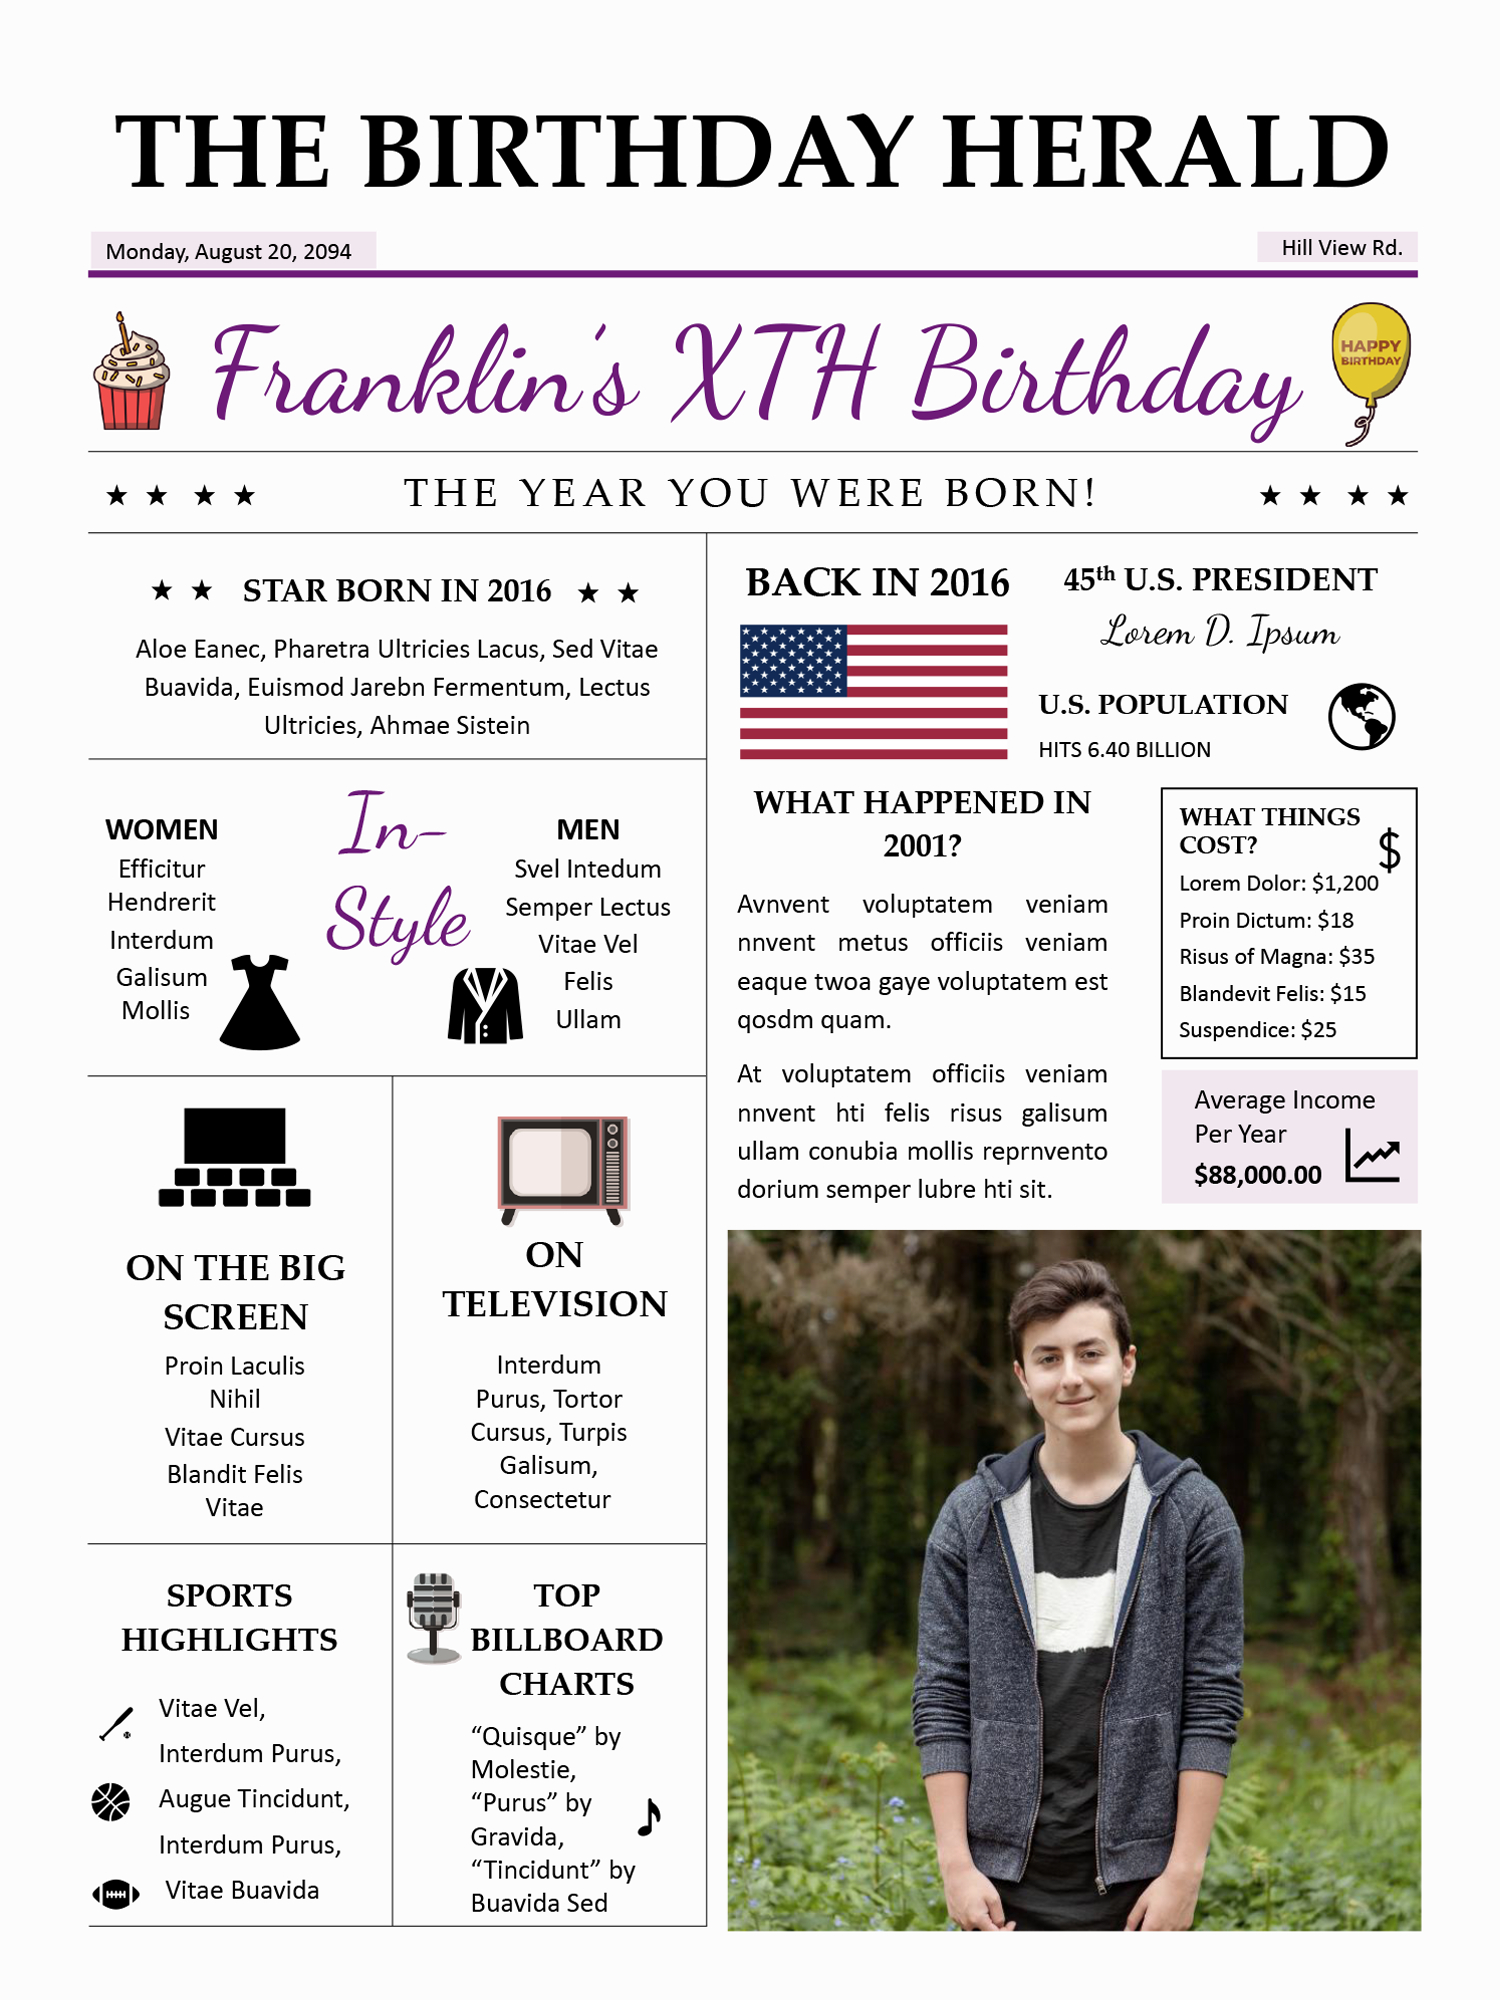 Back in 2016 Birthday Newspaper Template - Front Page